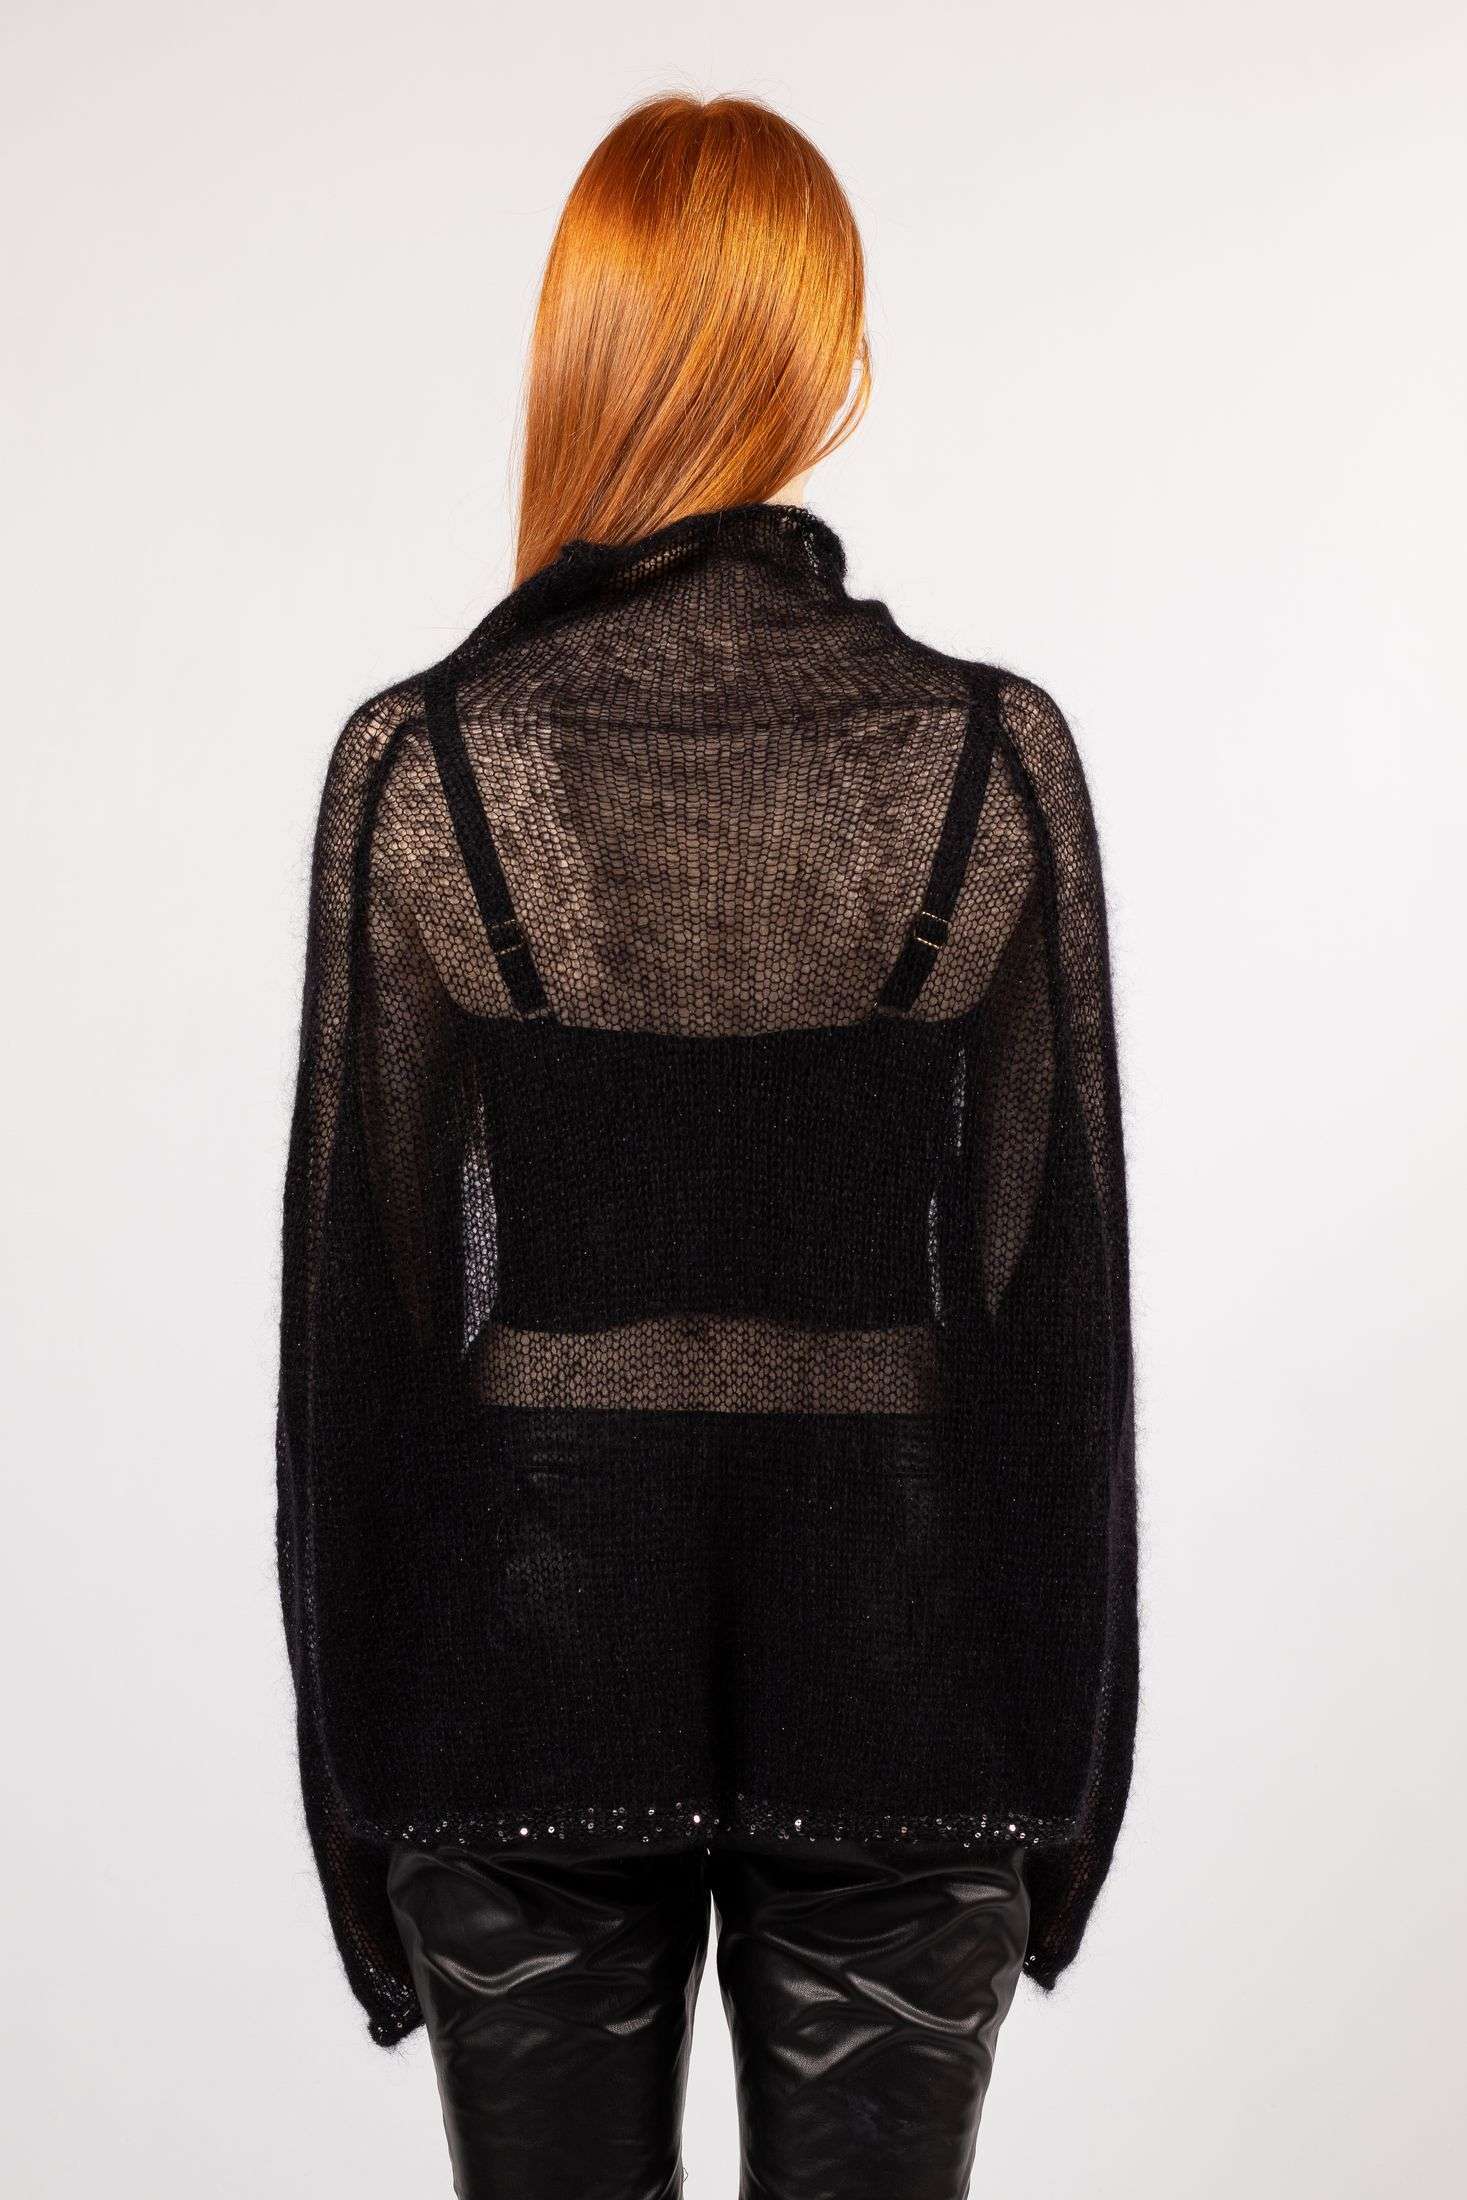 Discover the perfect blend of style and comfort with our black mohair sweater for women, accentuated by long sleeves and a touch of transparent allure.